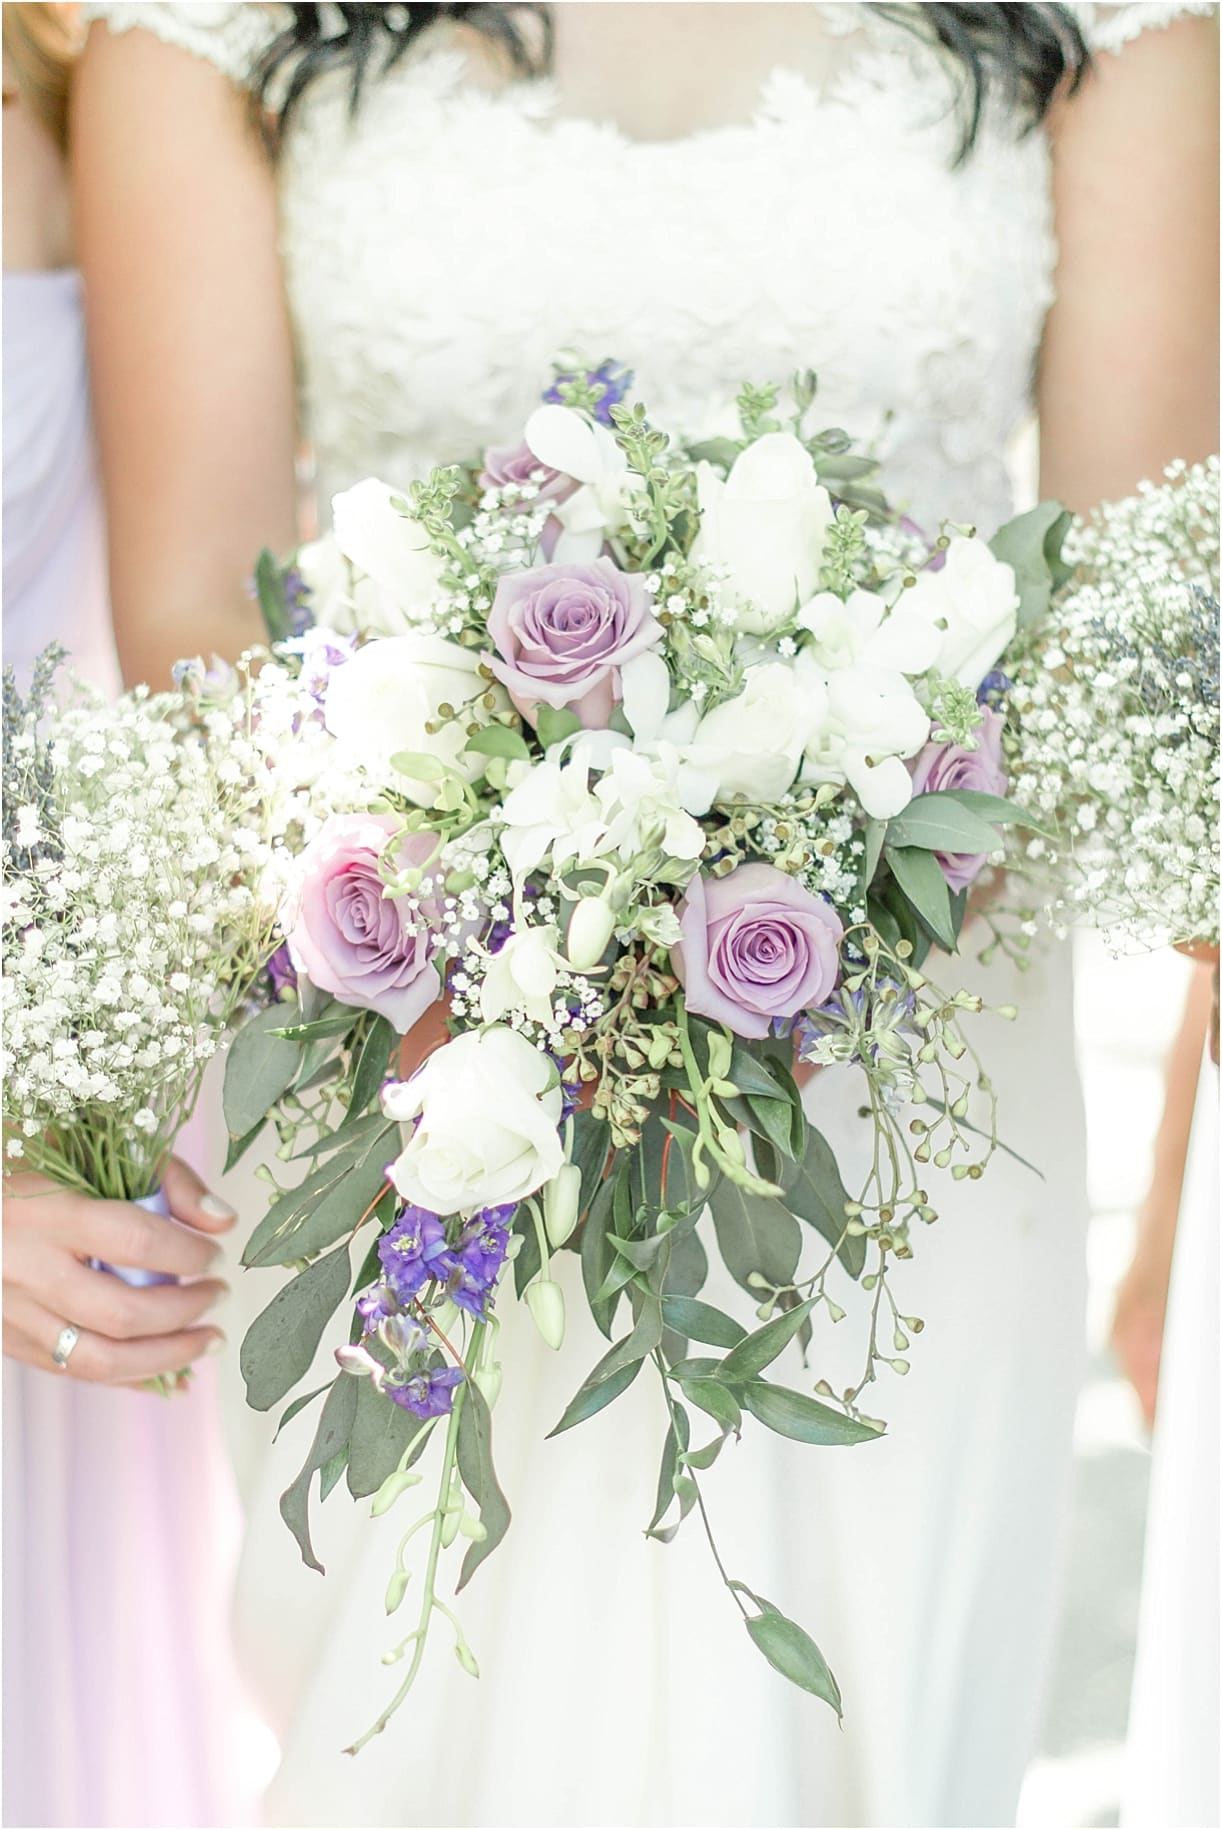 Interracial Lavender Richmond Virginia Wedding as seen on Hill City Bride Blog by Demi Mabry Photography bouquet flowers